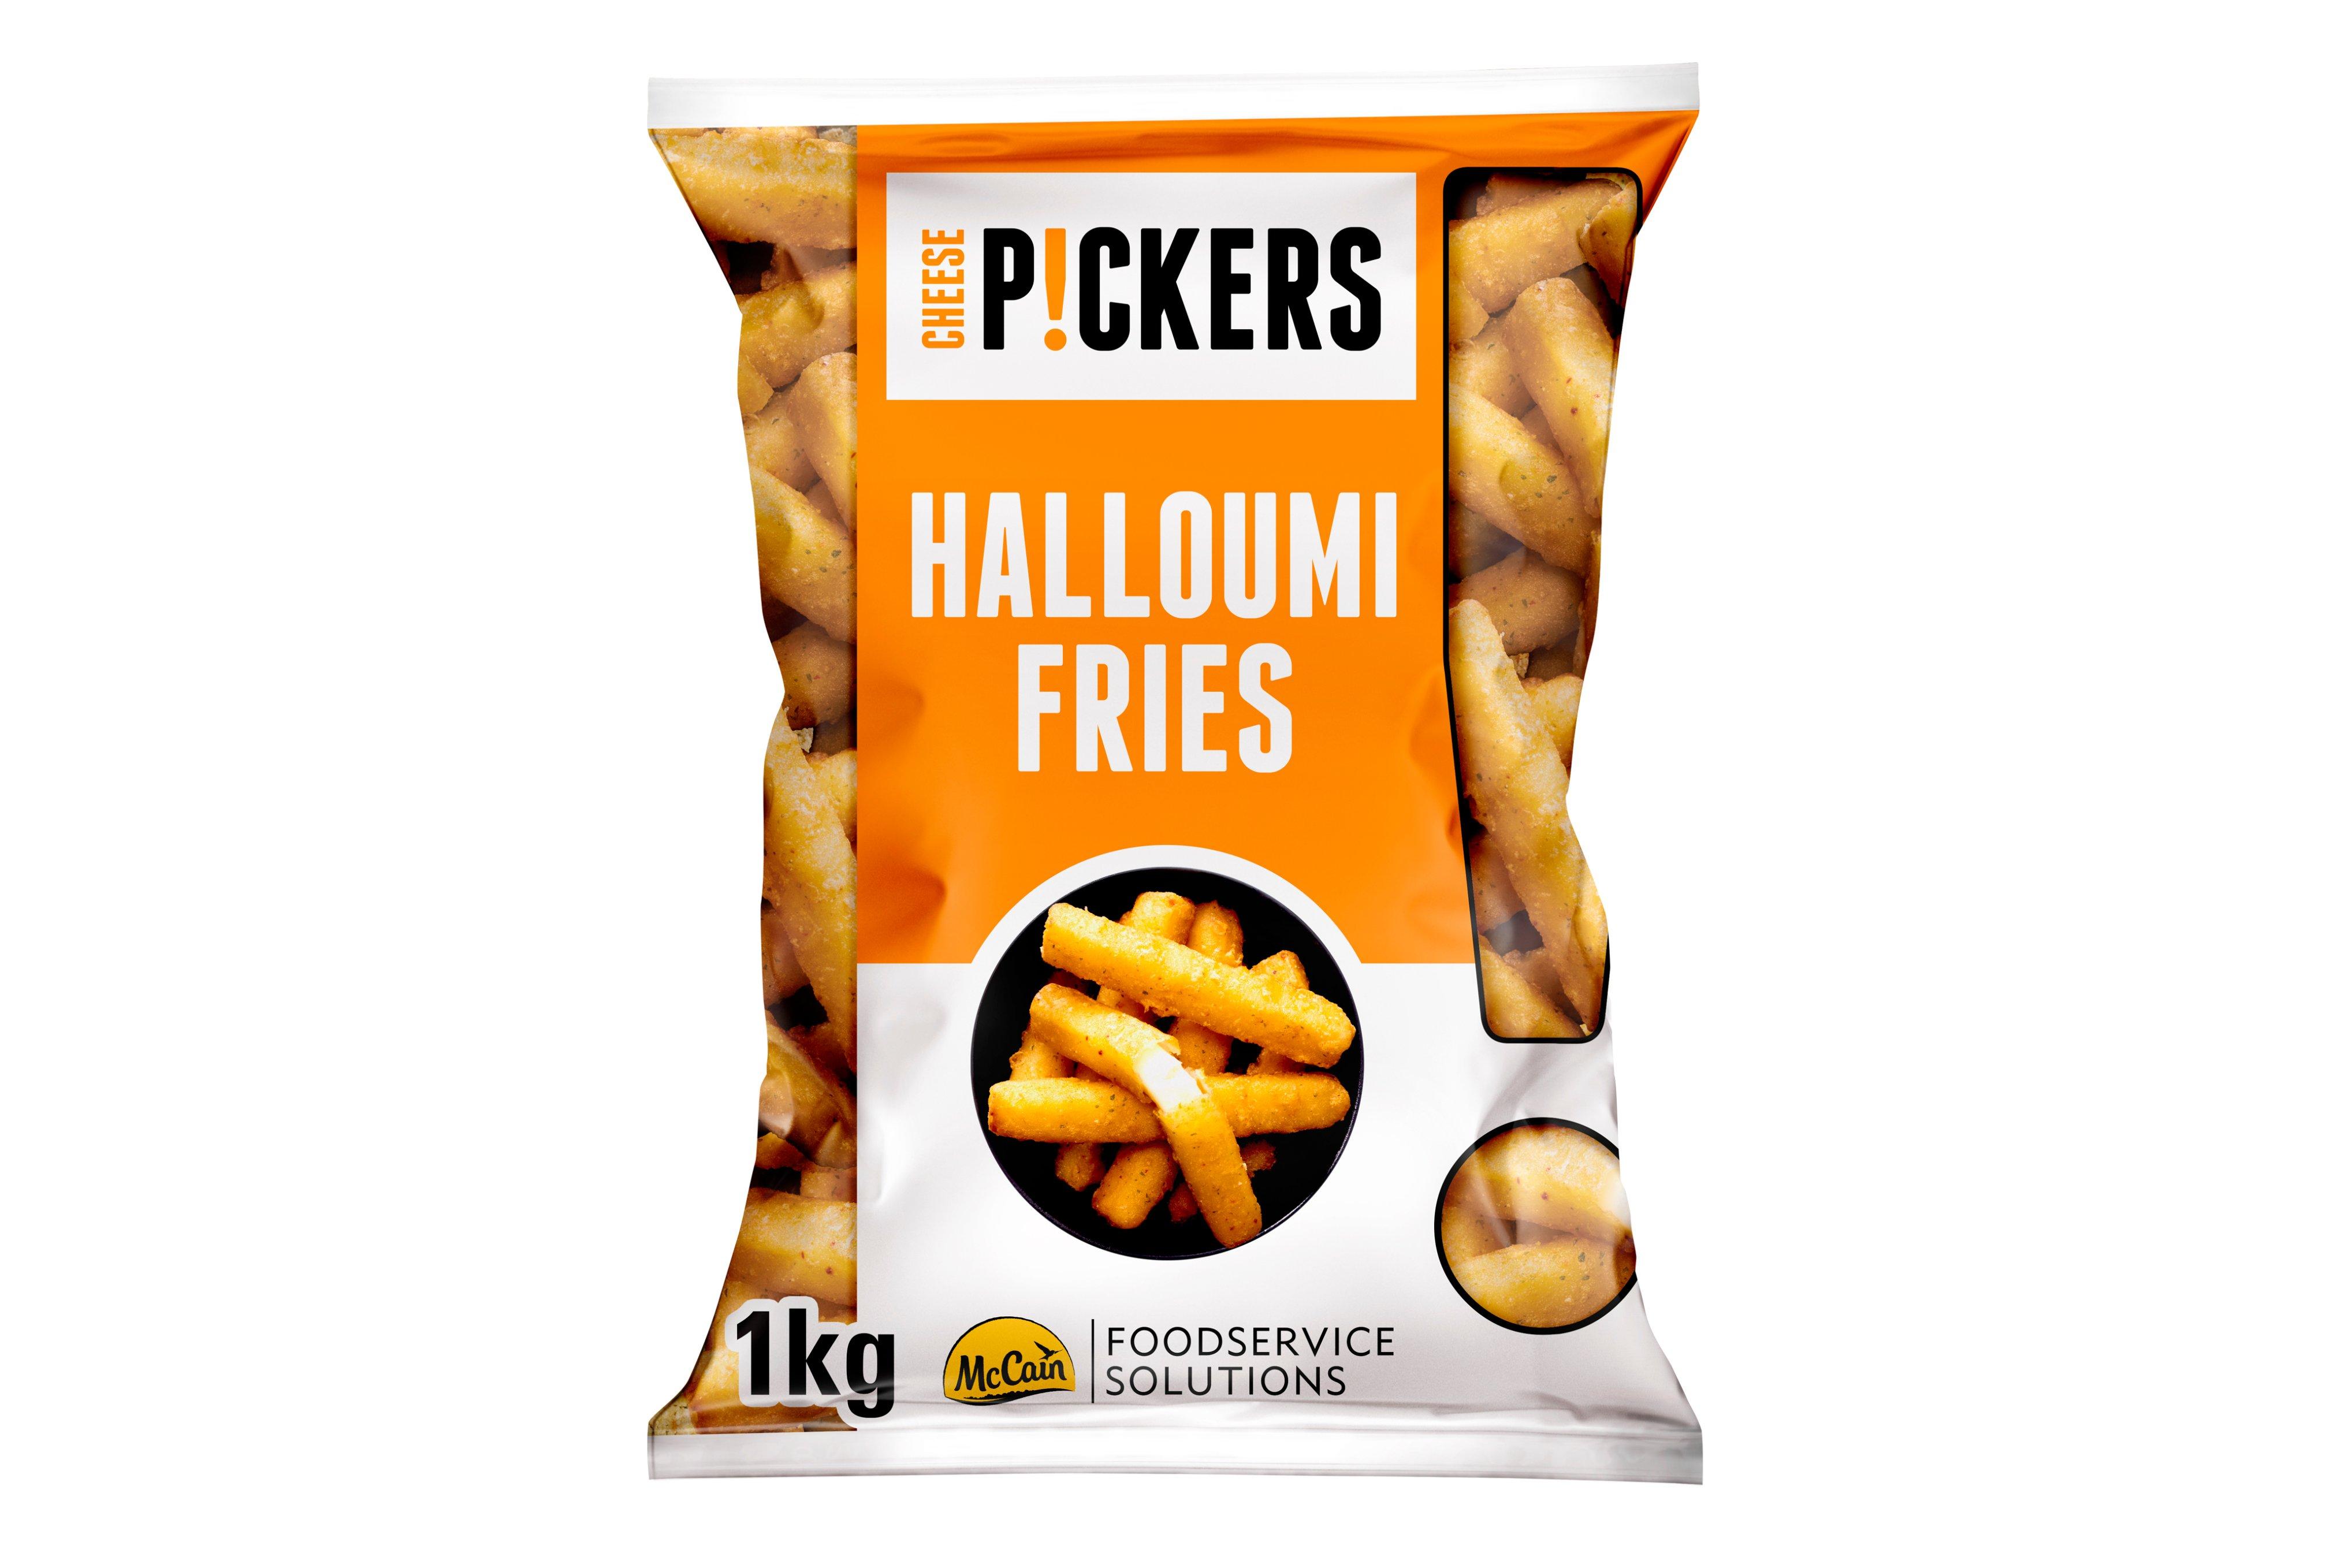 Cheese Pickers Halloumi Fries